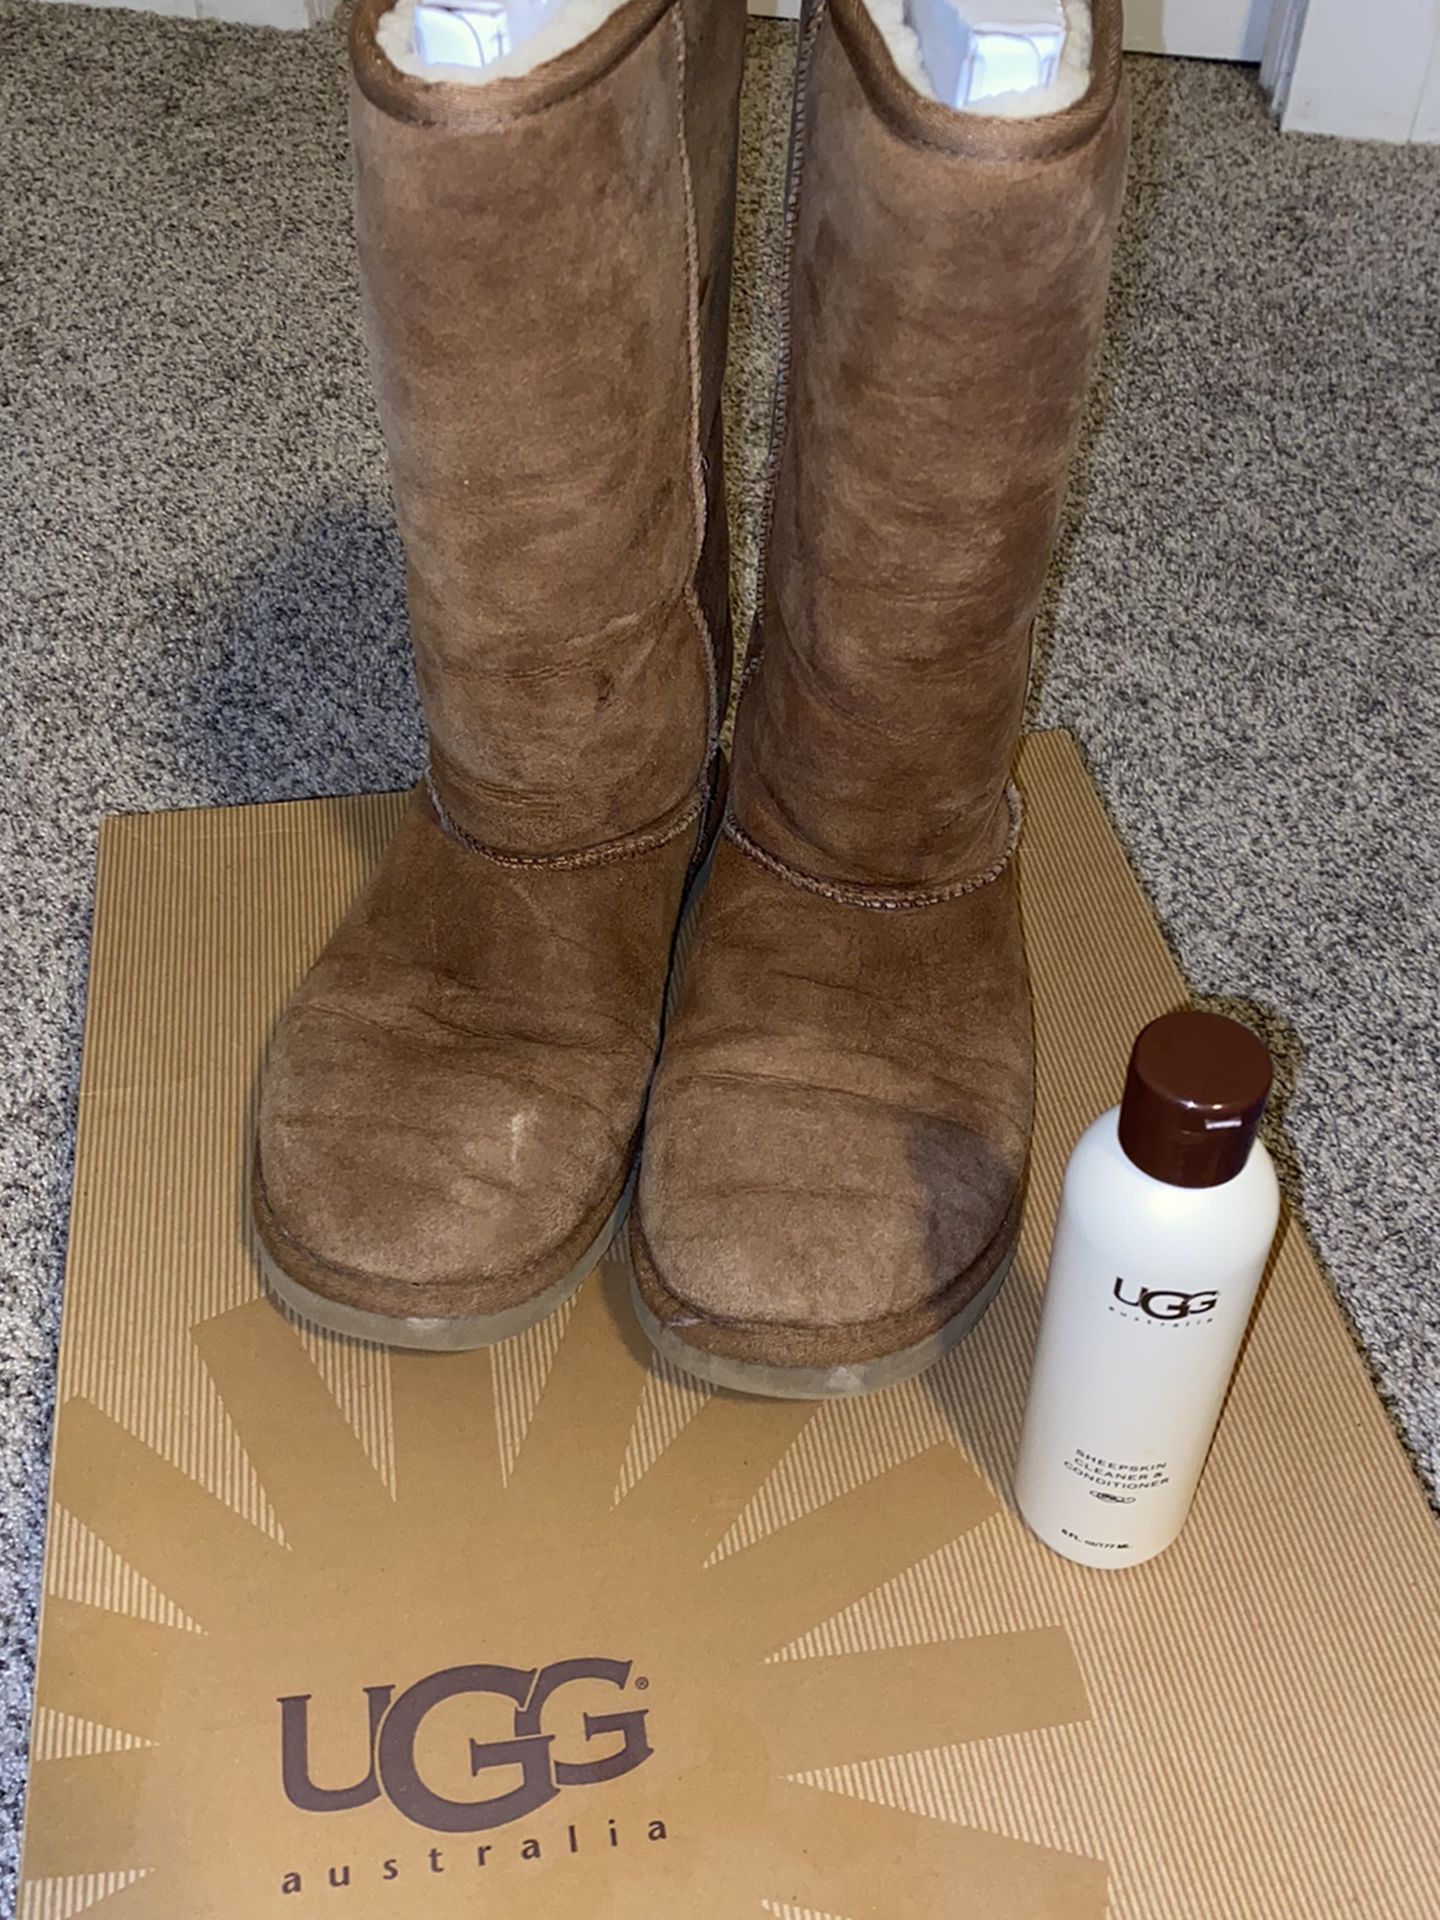 Women’s Classic Tall Ugg Boots Size 7